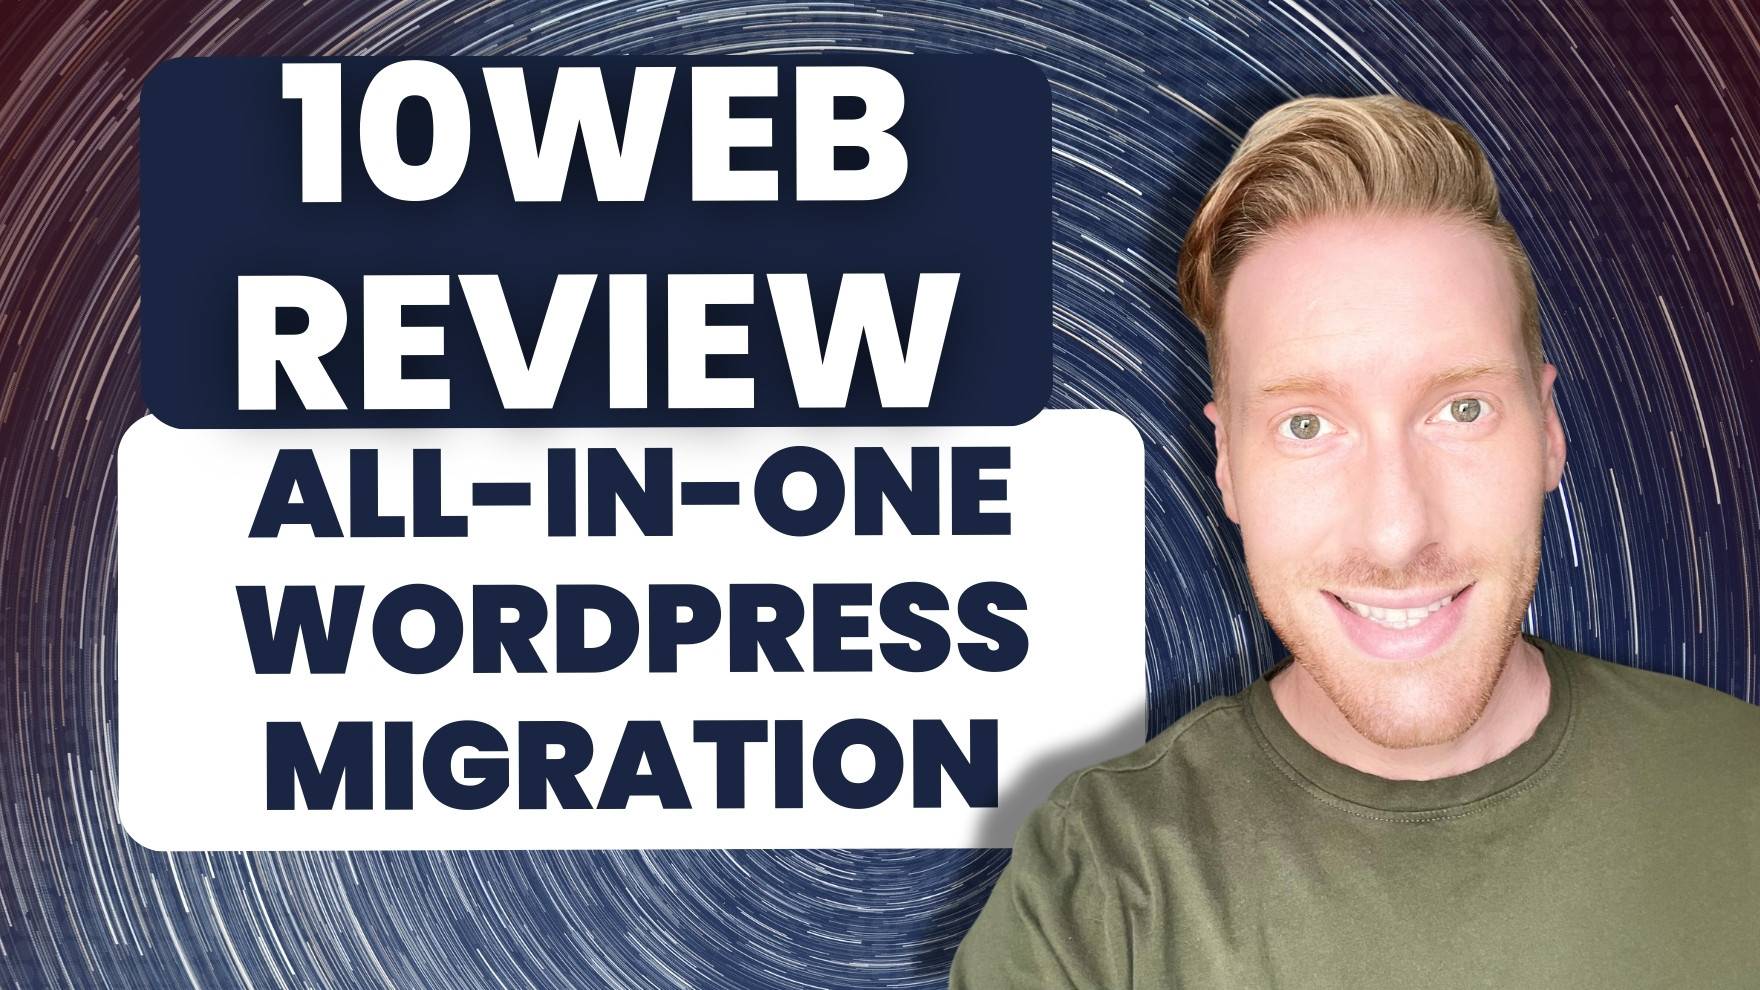 10Web Review - All in one wordpress migration